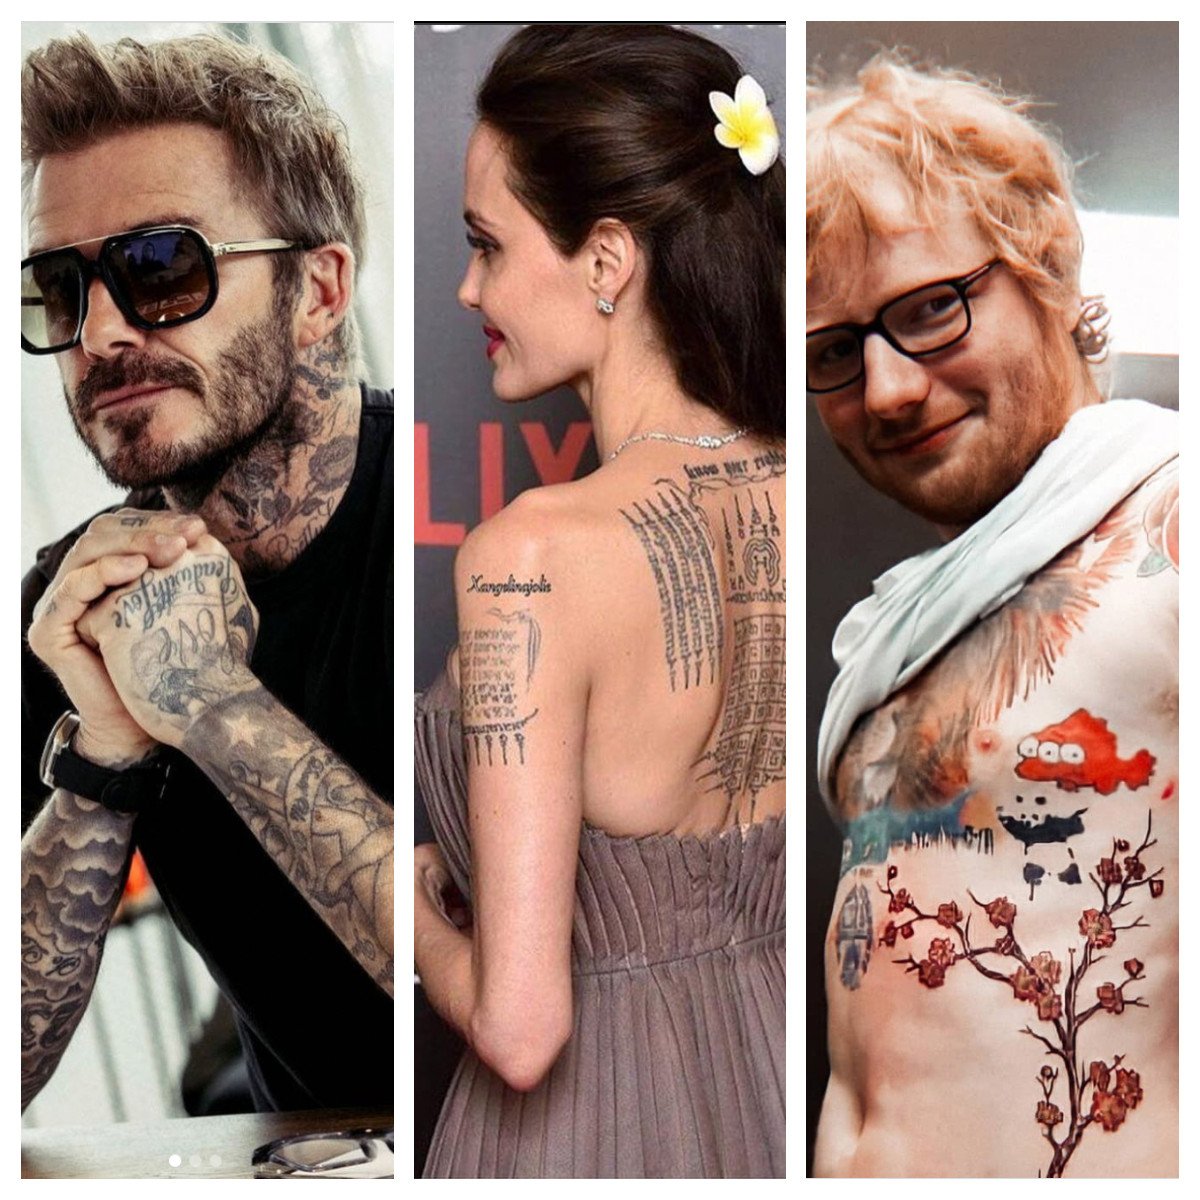 7 Awesome Reasons to Date Tattooed Women – Tattoo for a week